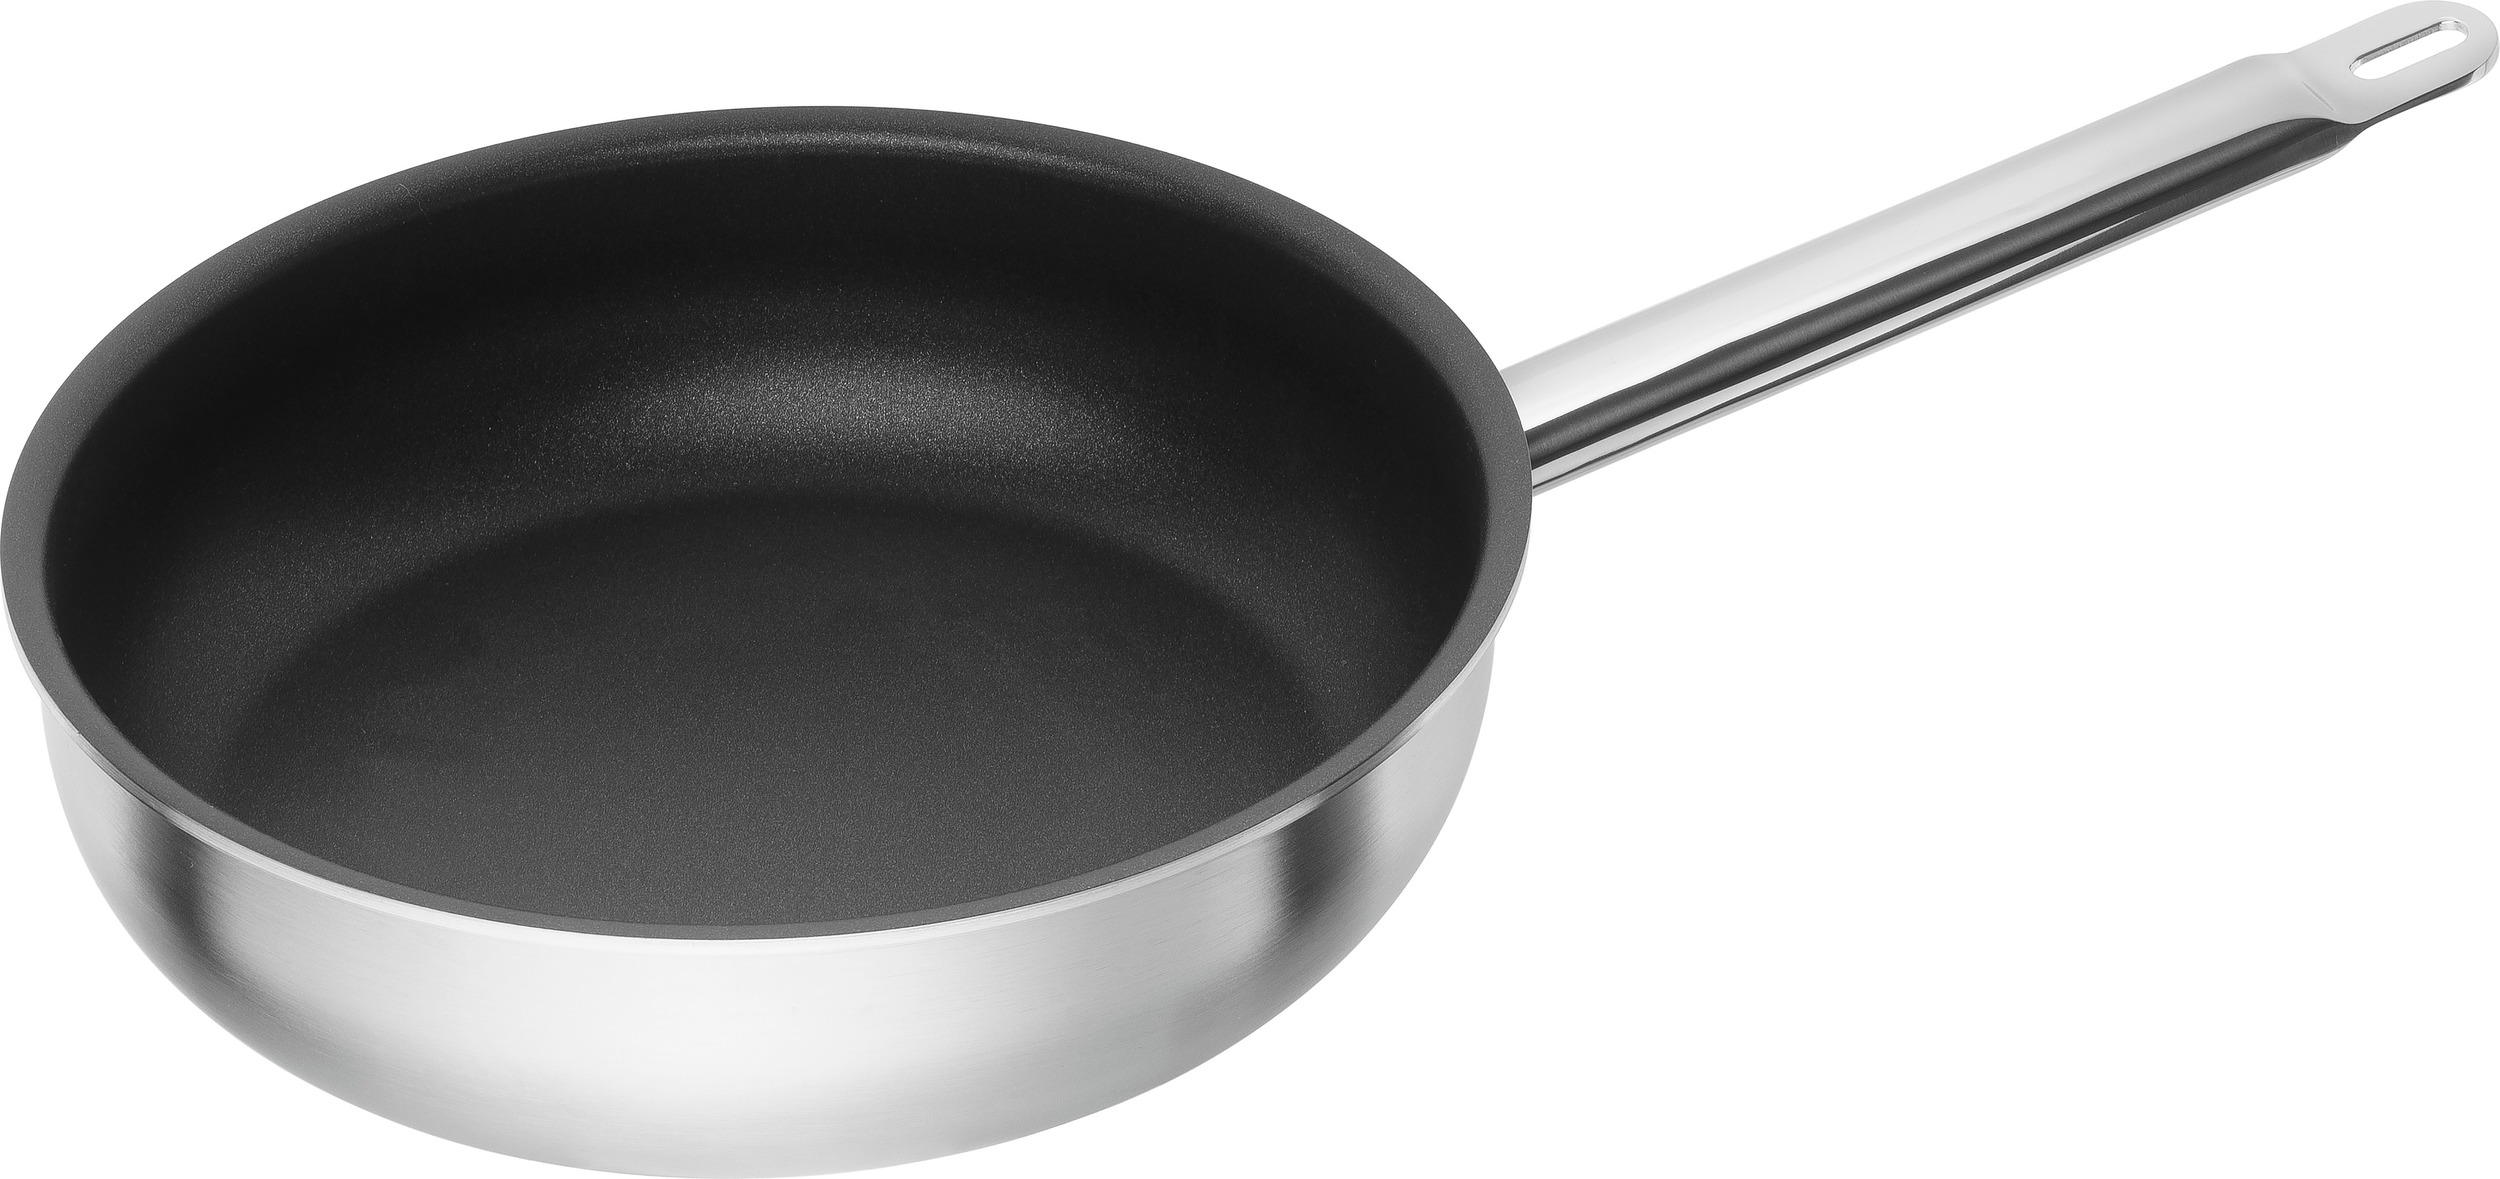 https://3fa-media.com/zwilling/zwilling-zwilling-pro-pan-26-cm-the-board-with-a-non-stick-coating__107723_a948690-s2500x2500.jpg